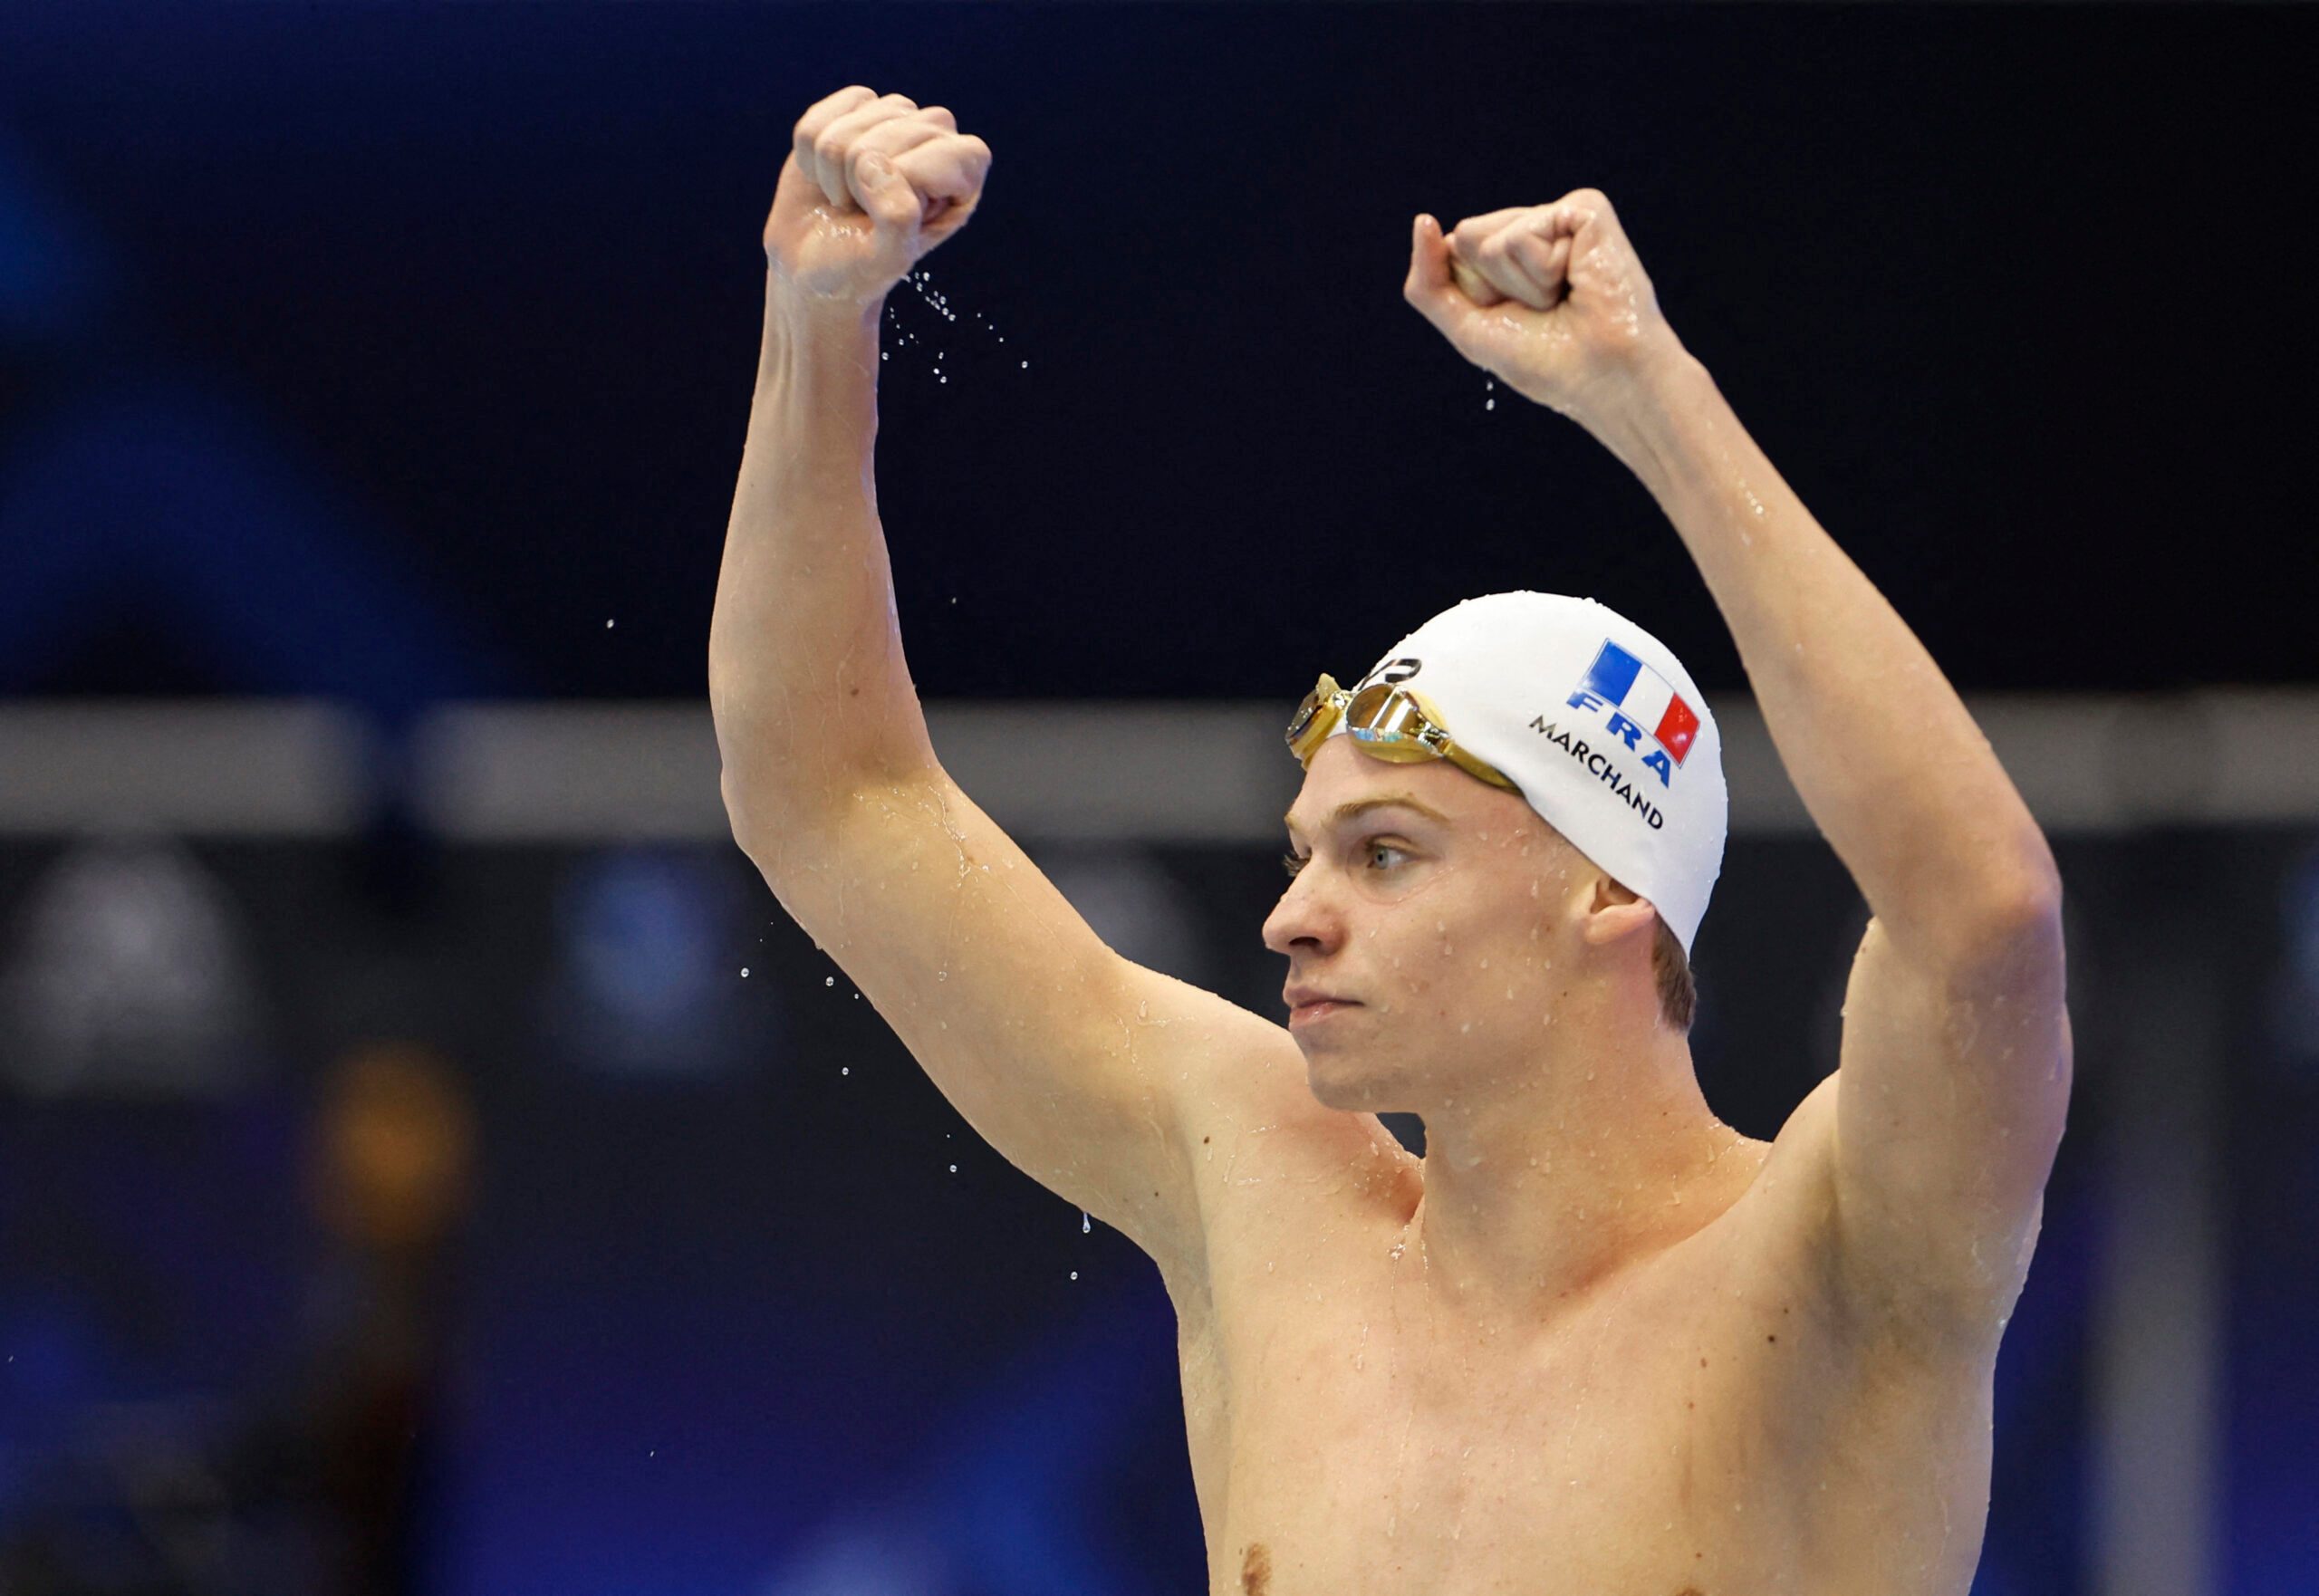 French torpedo Marchand smashes Phelps' 15-year record at worlds